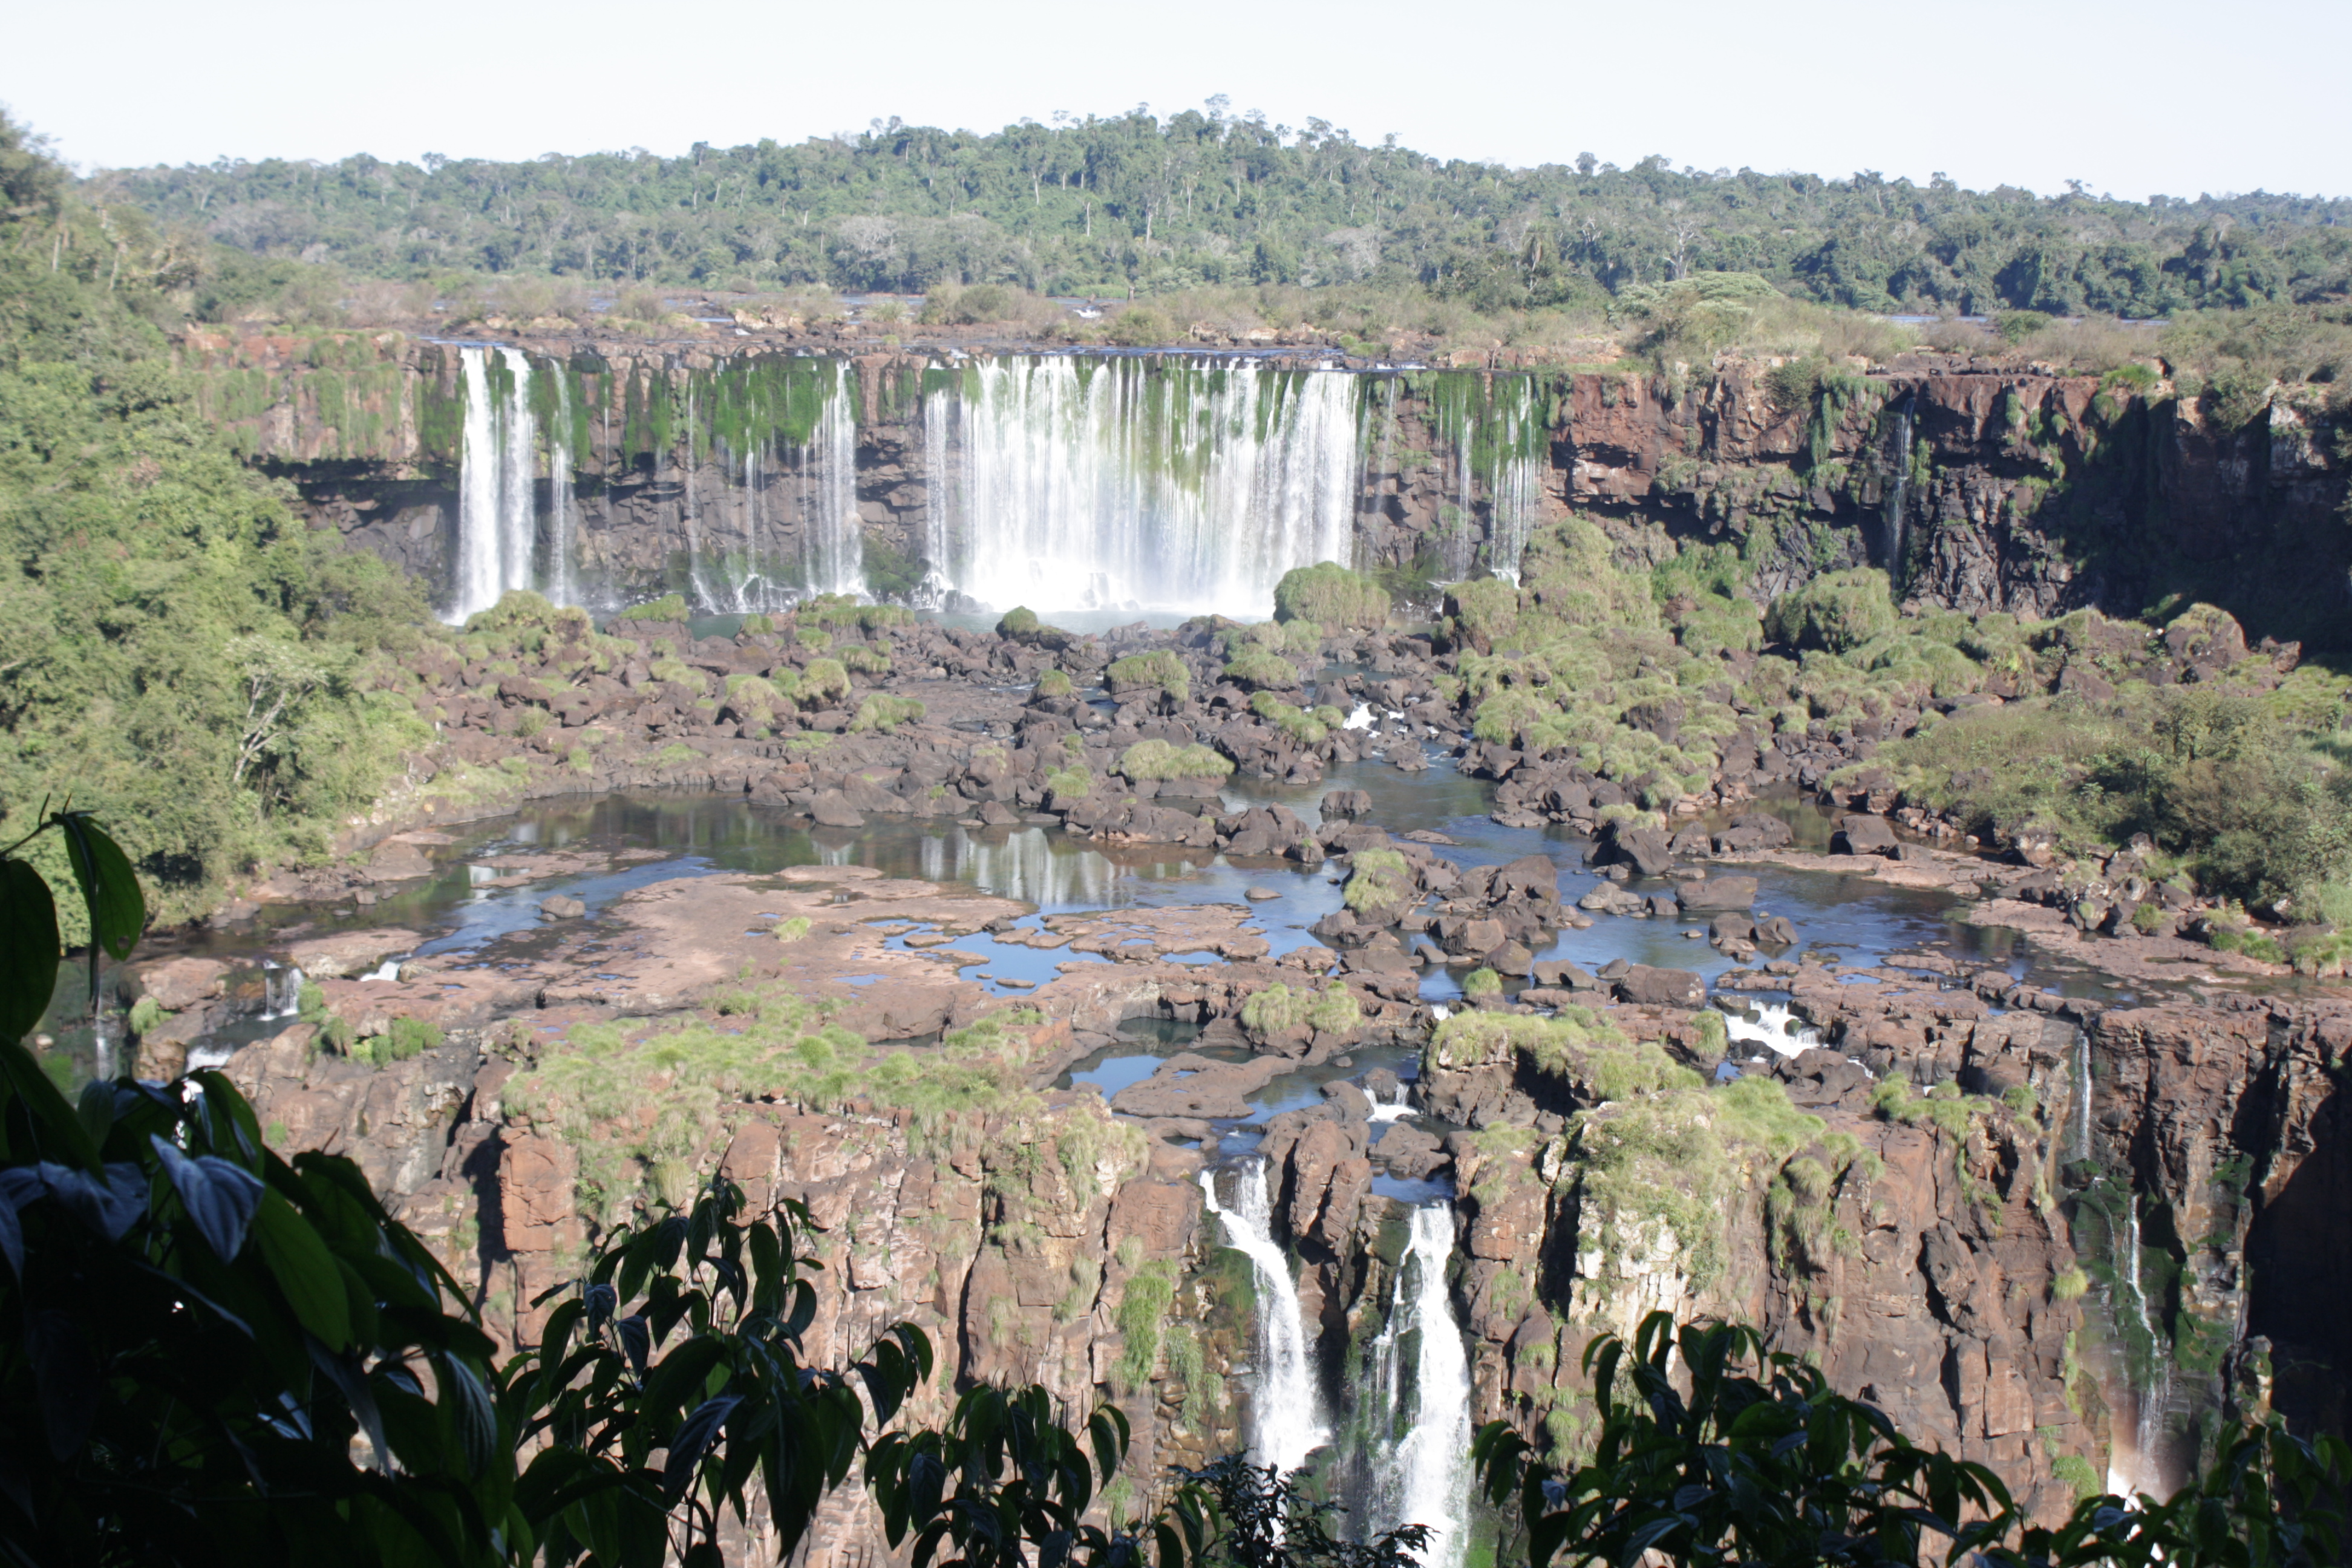 Panoramic view of the cataracts from the Brazilian side of the falls, Foz do Iguacu, Brazil